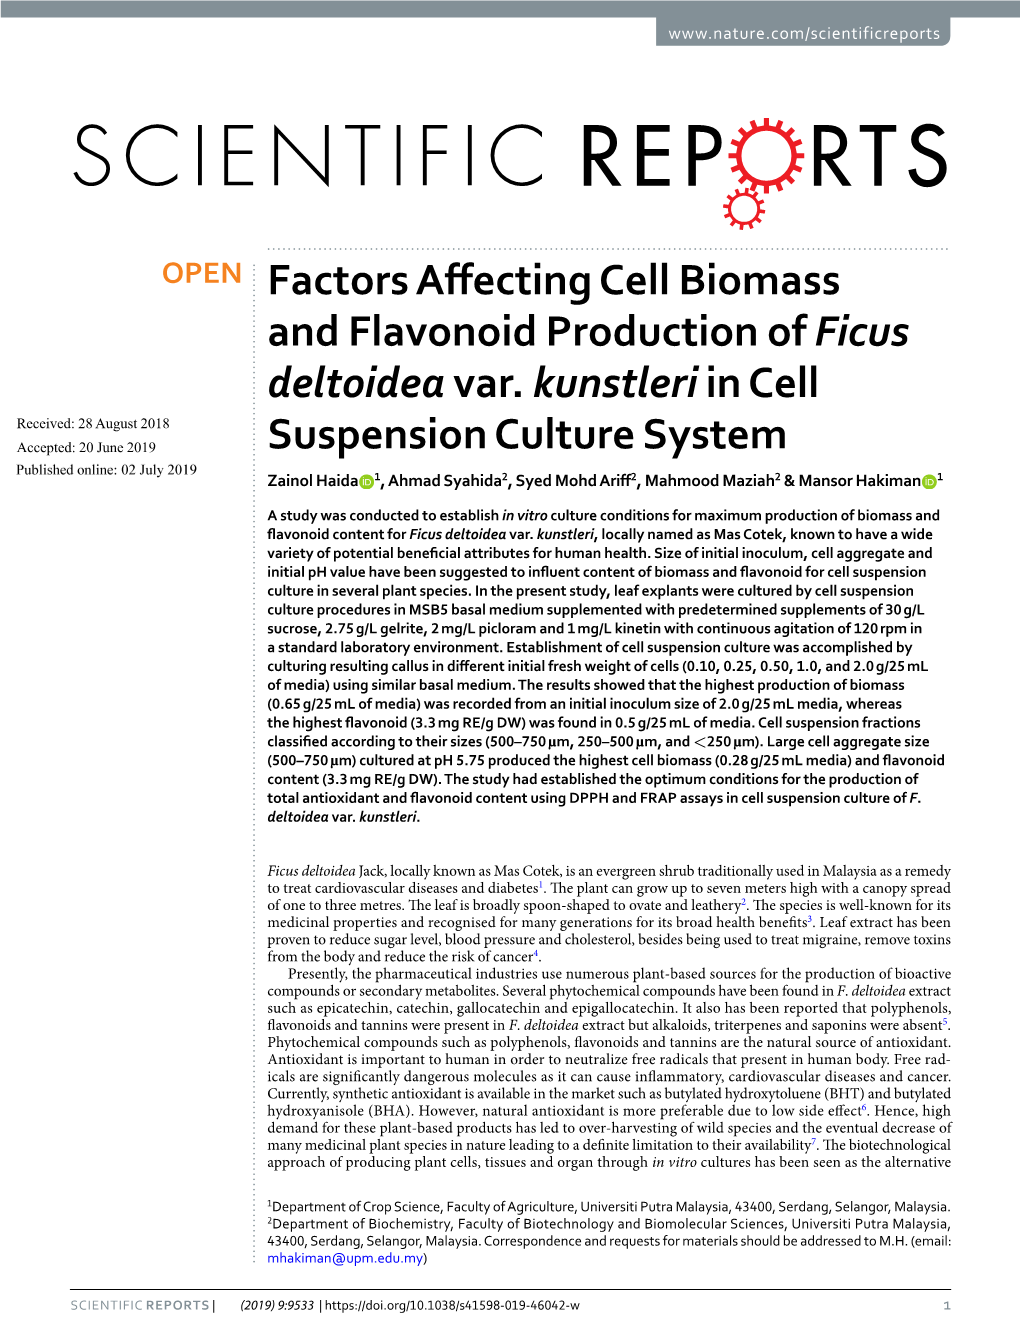 Factors Affecting Cell Biomass and Flavonoid Production of Ficus